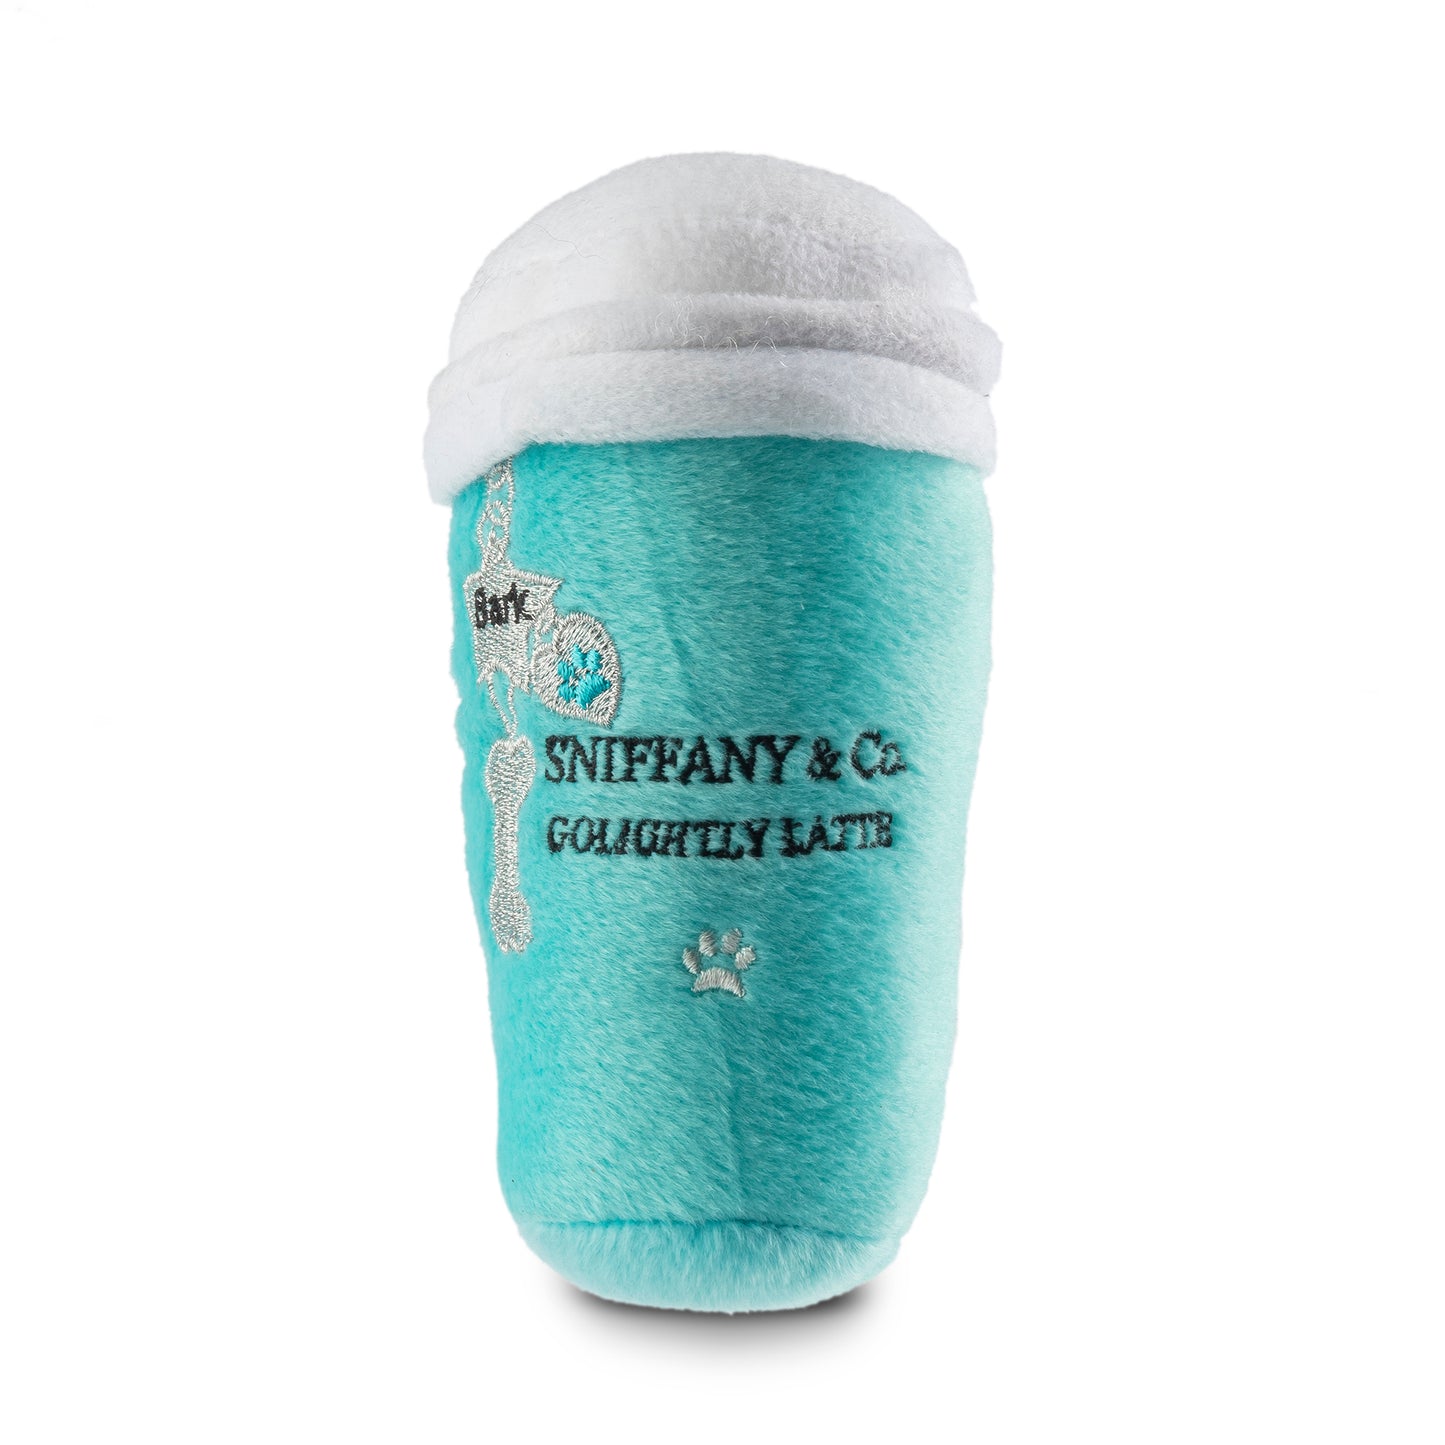 Haute Coffee Sniffany & Co. GoLightly Latte Toy